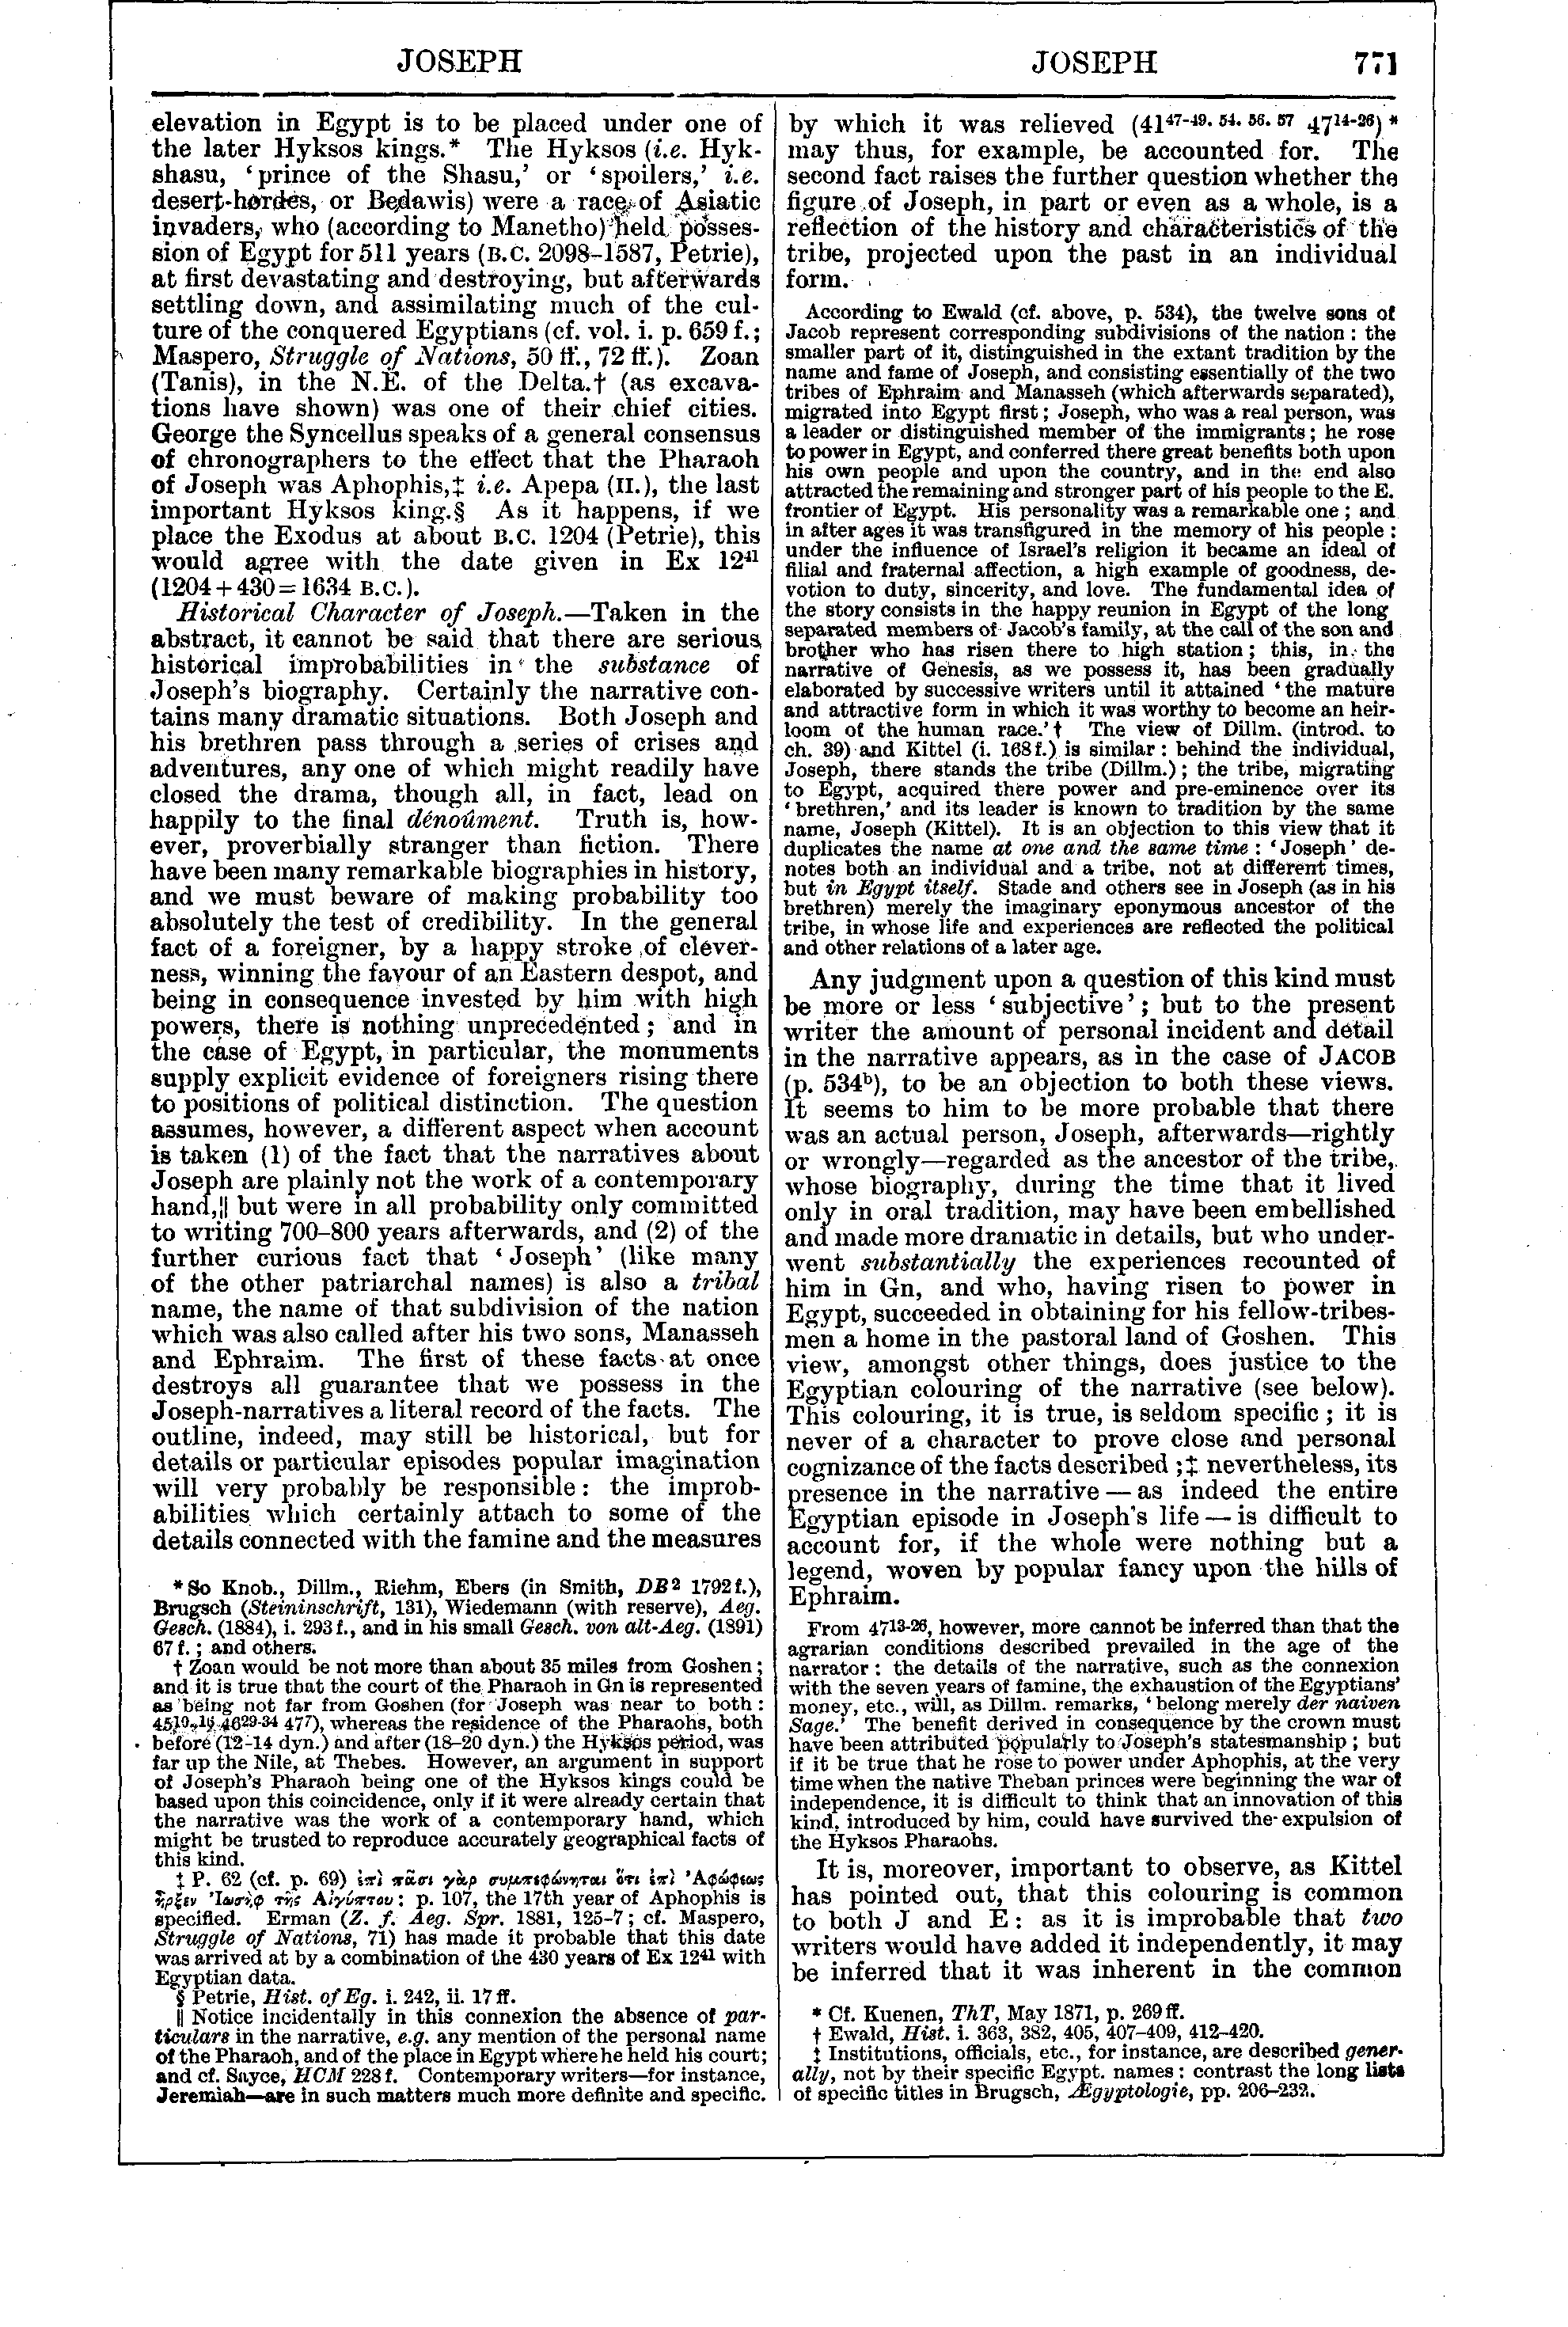 Image of page 771